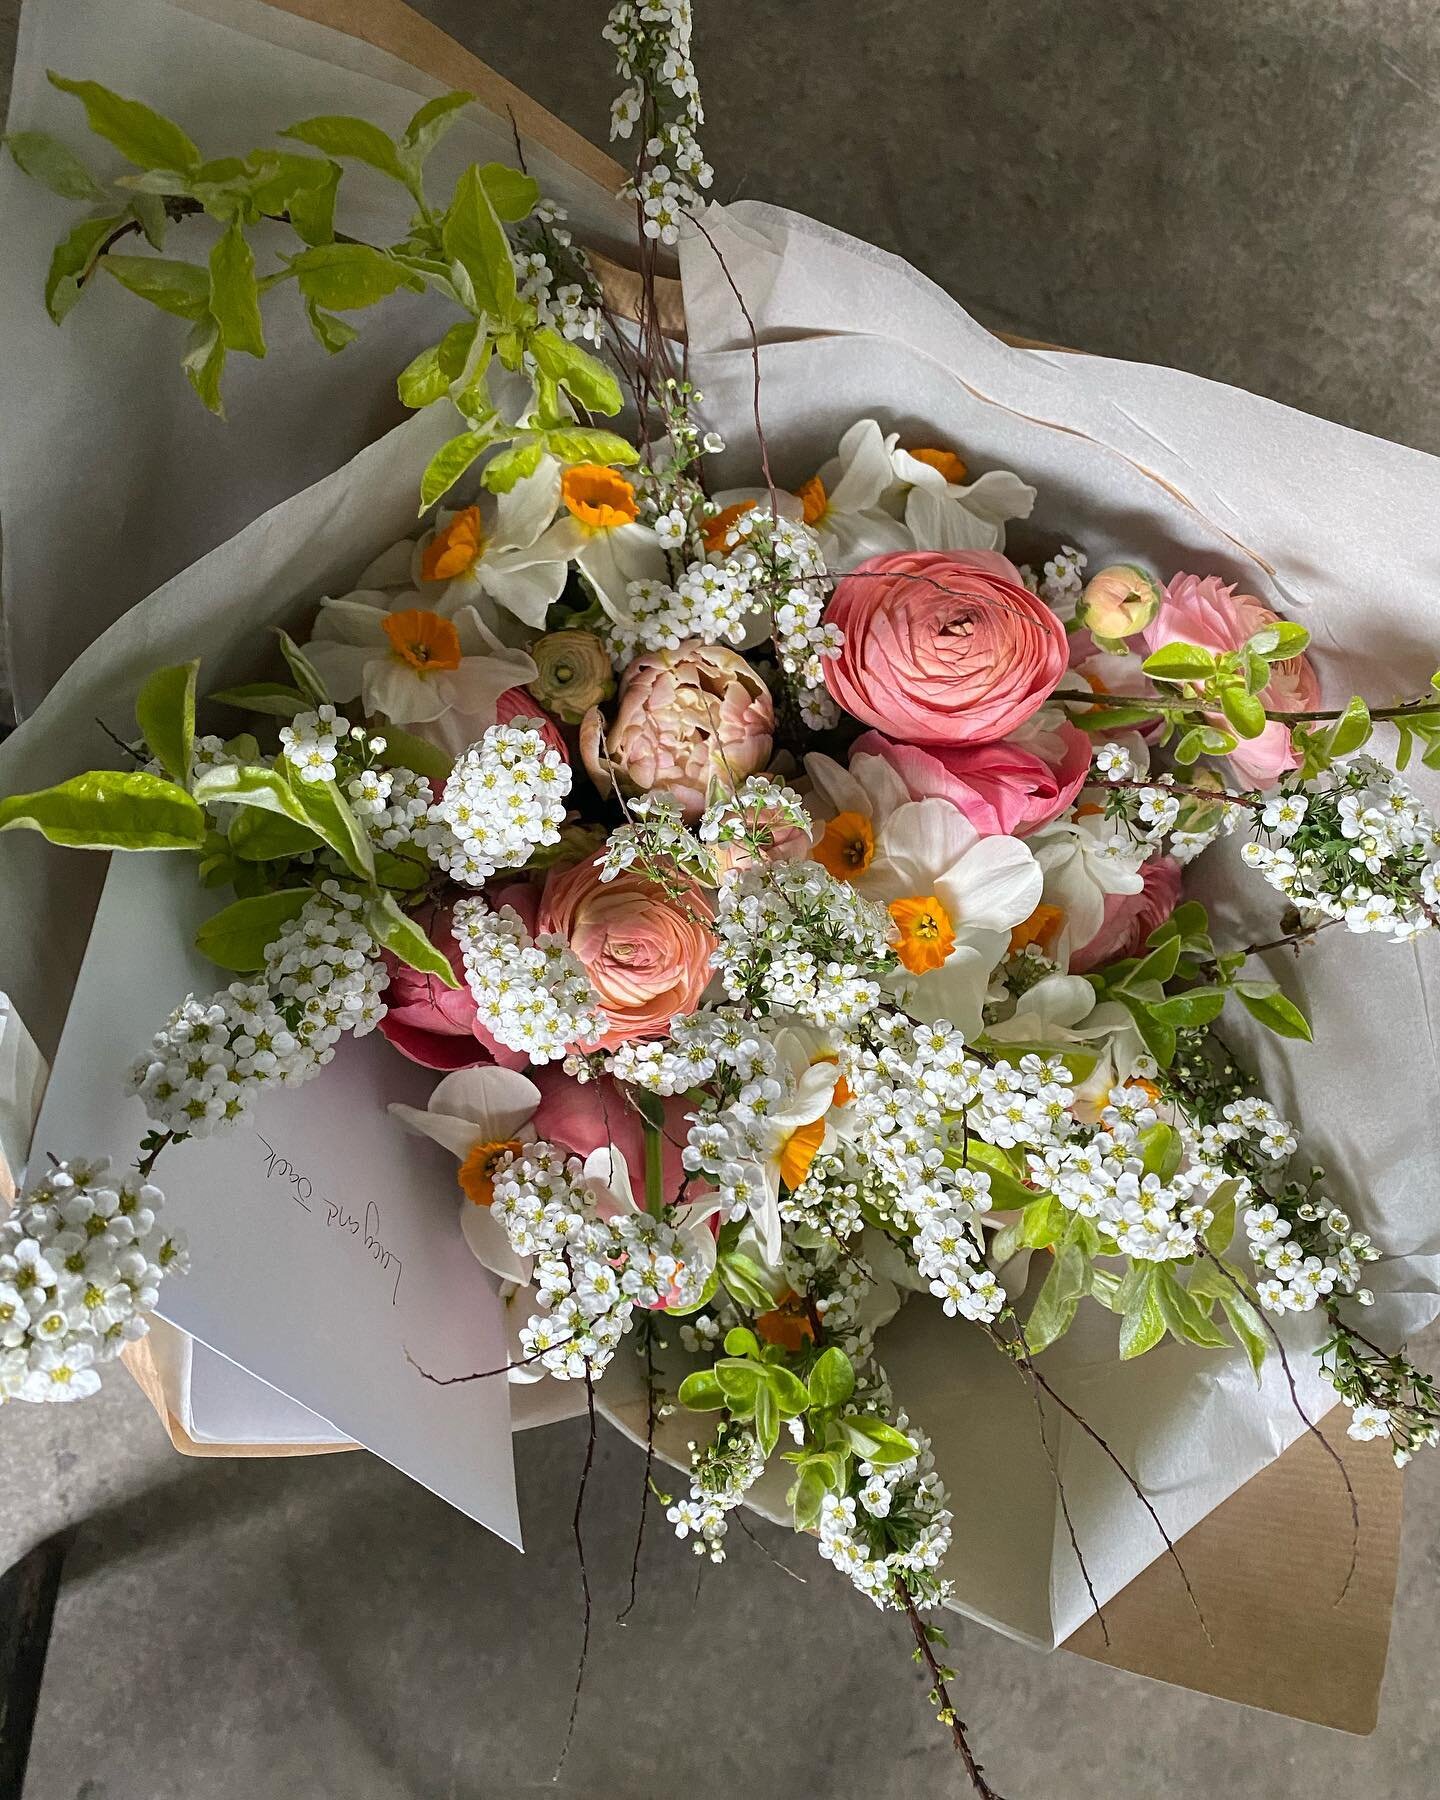 Our flowers aren&rsquo;t quite ready for Mother&rsquo;s Day this year. In a few short weeks we will have an abundance though. 

We are offering the gift of future flowers, either a bouquet in the season of your choice or the chance to come and pick f